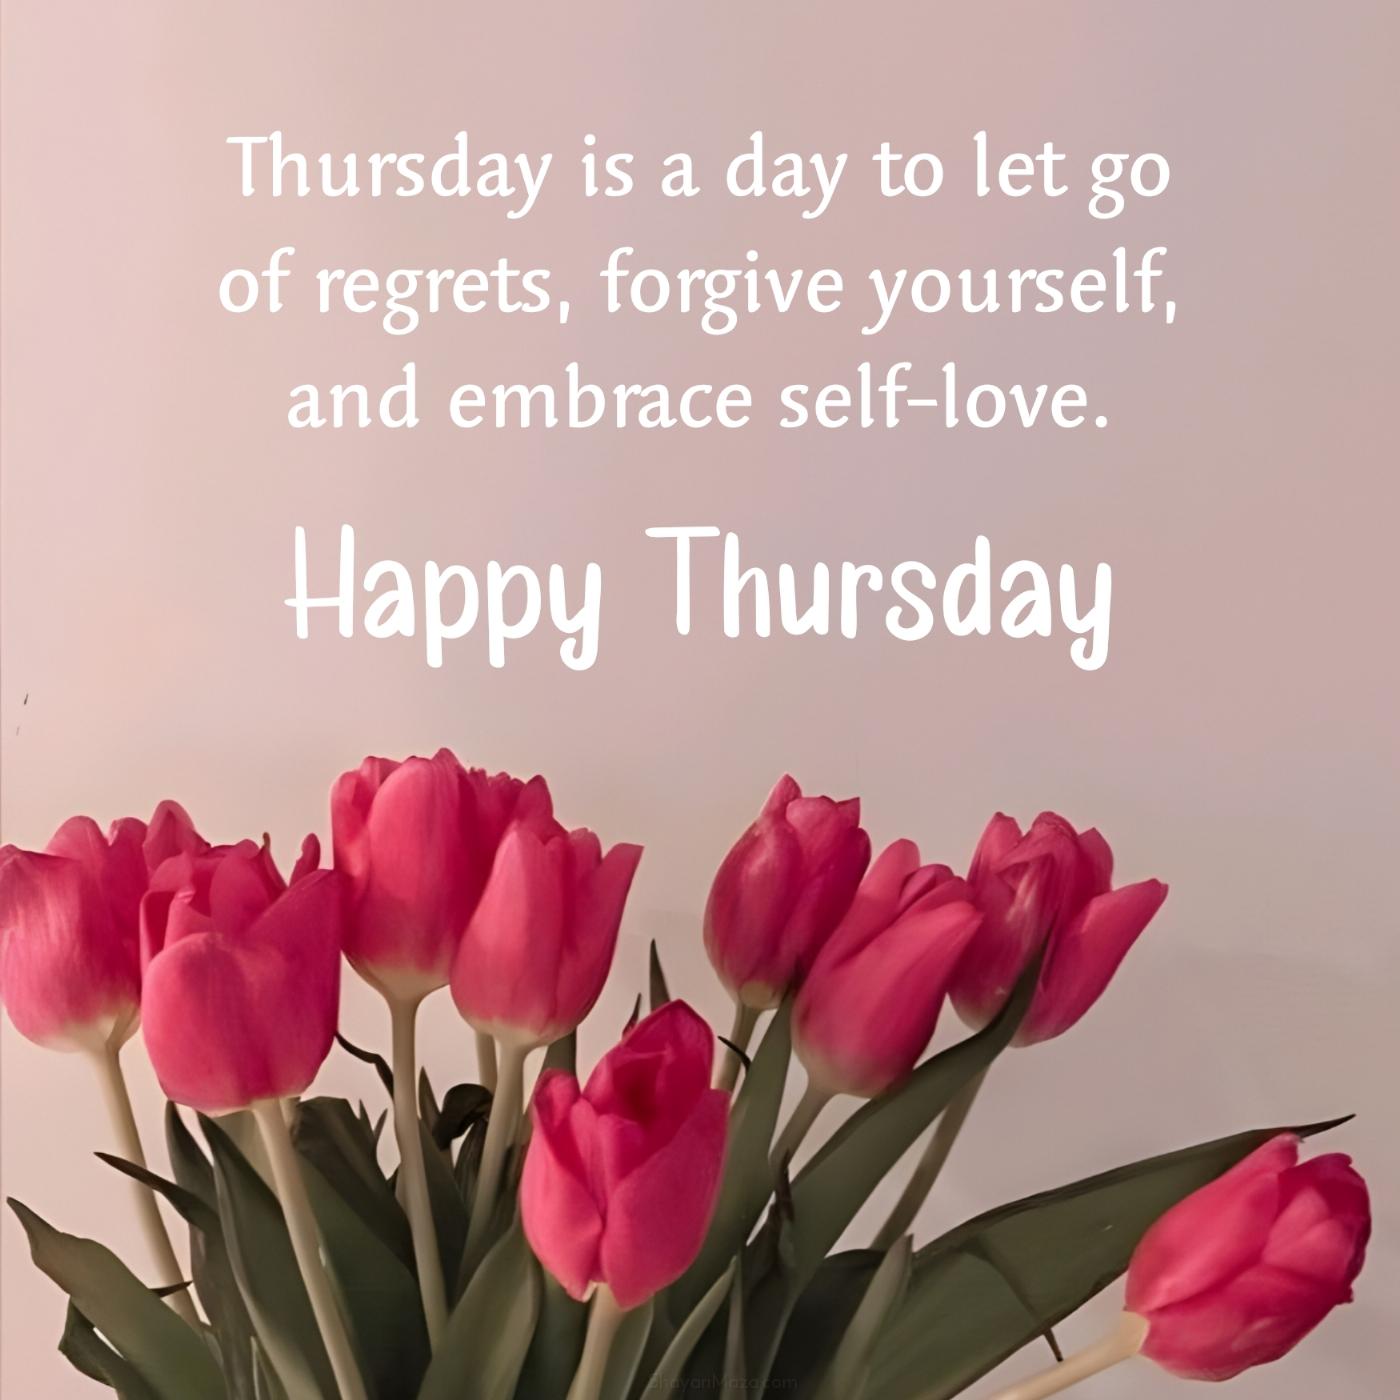 Thursday is a day to let go of regrets forgive yourself